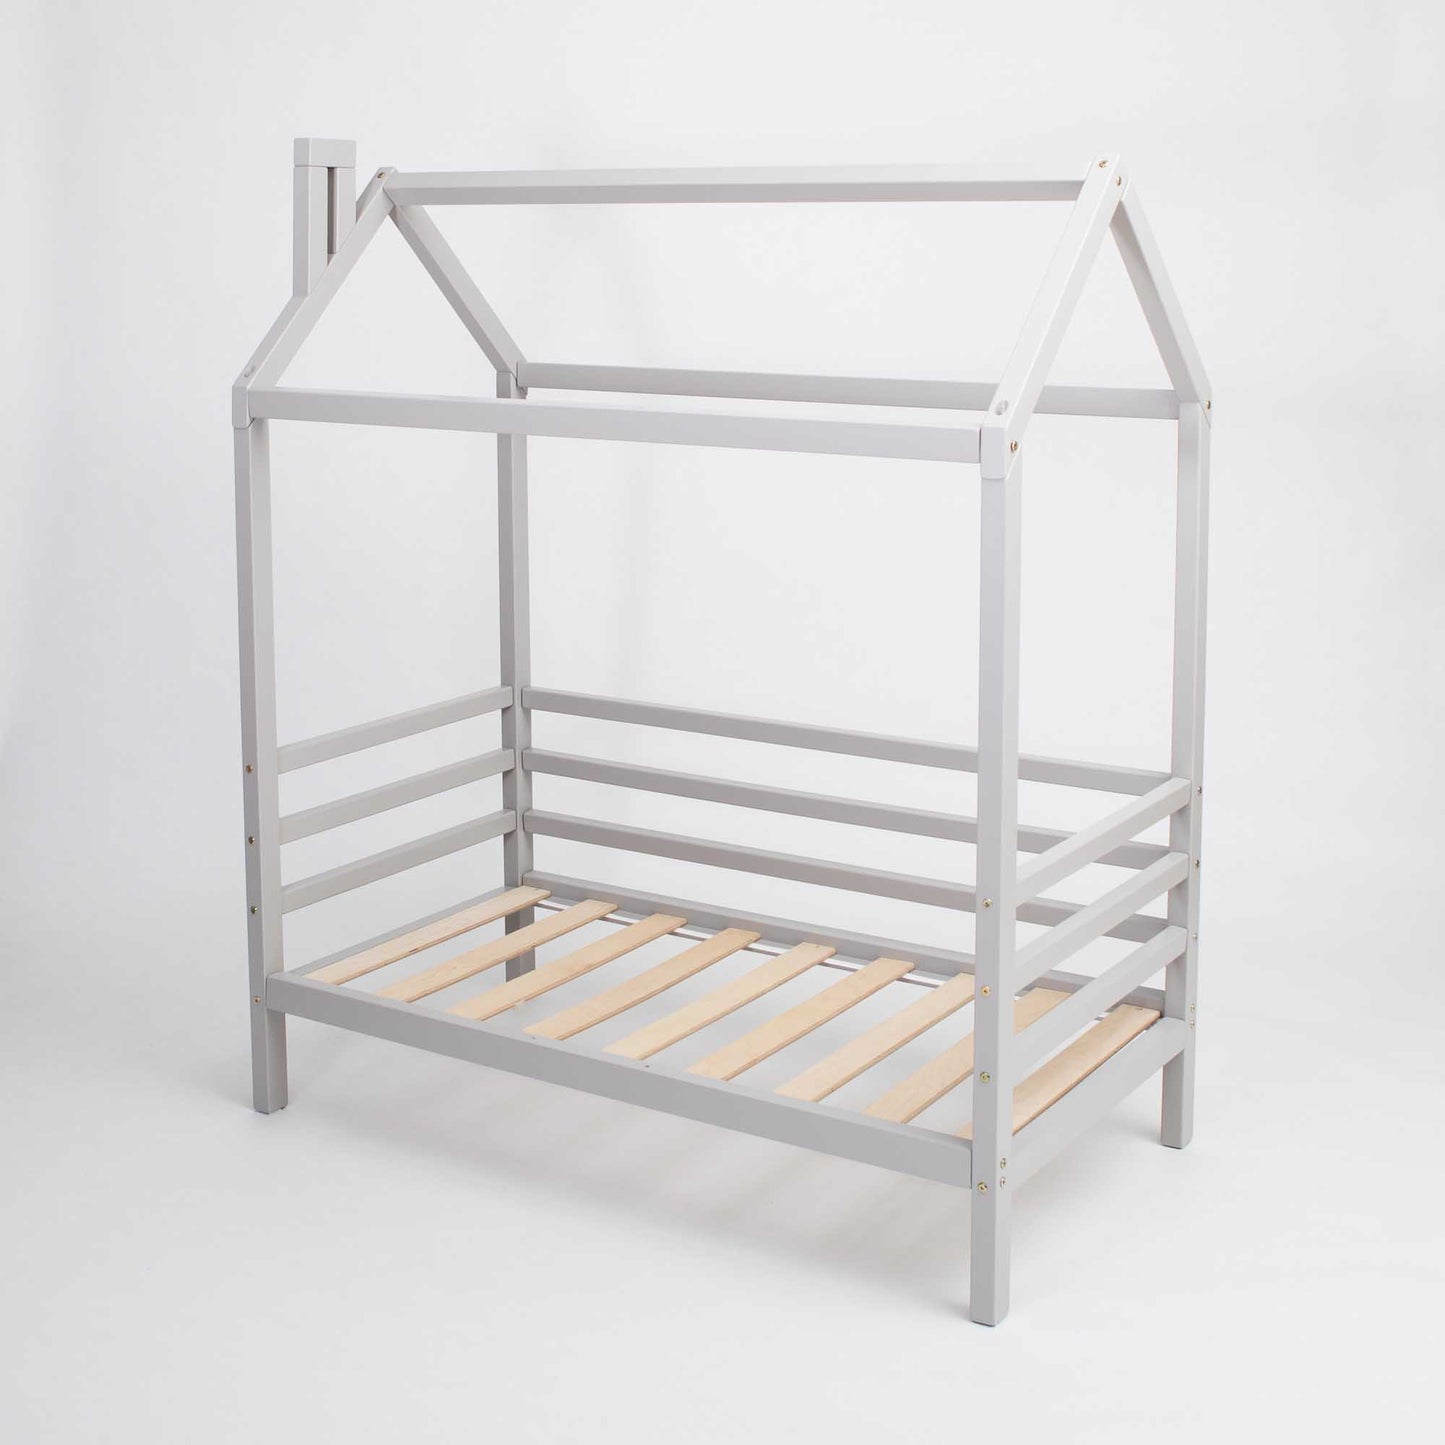 A Children's house bed on legs with 3-sided rails and a grey frame.